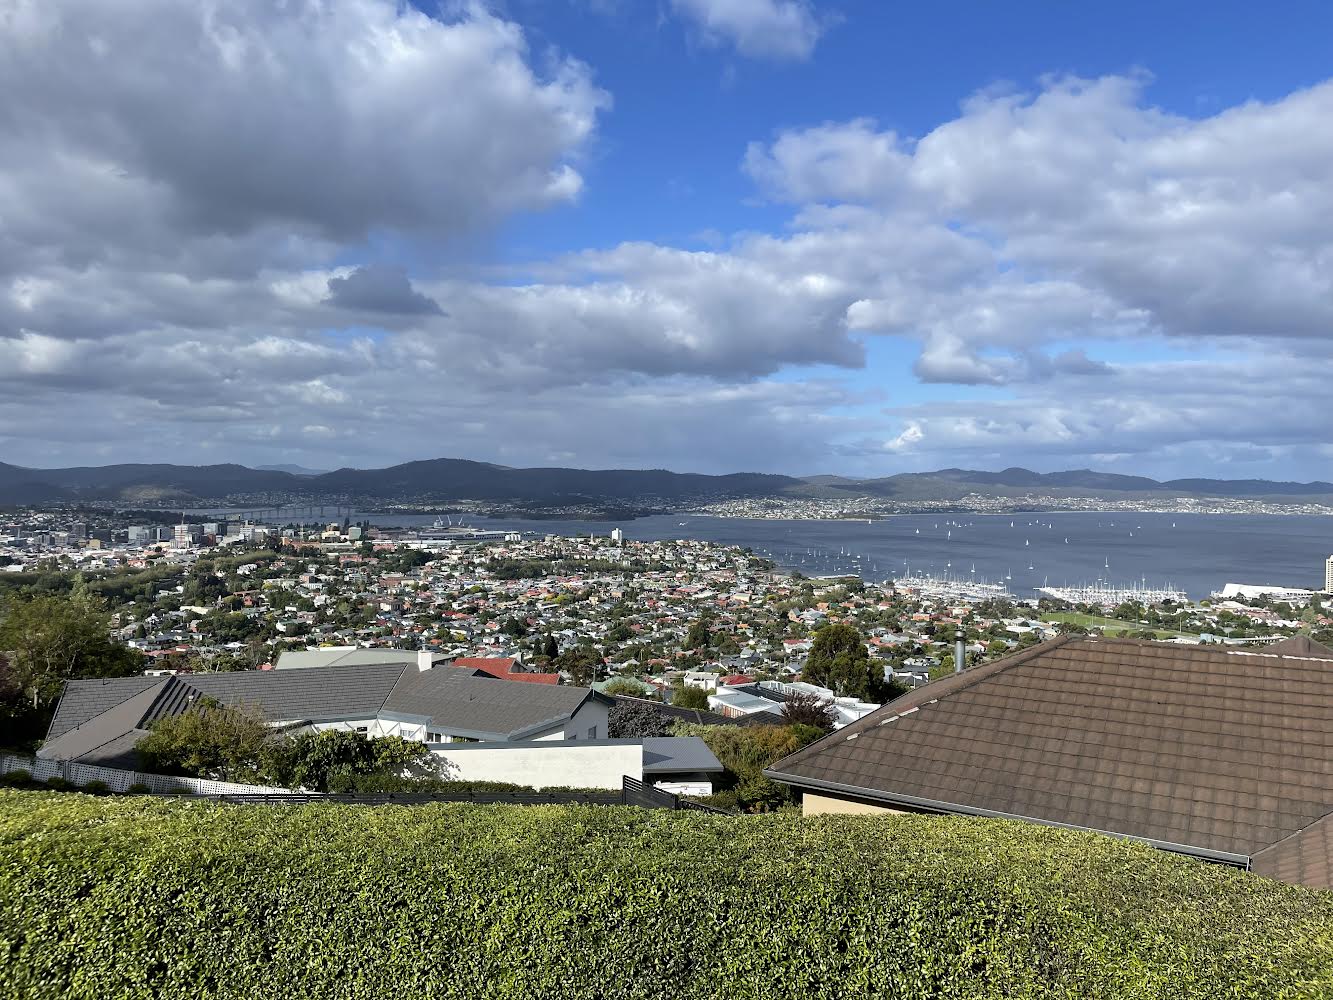 Hobart city view from the hills